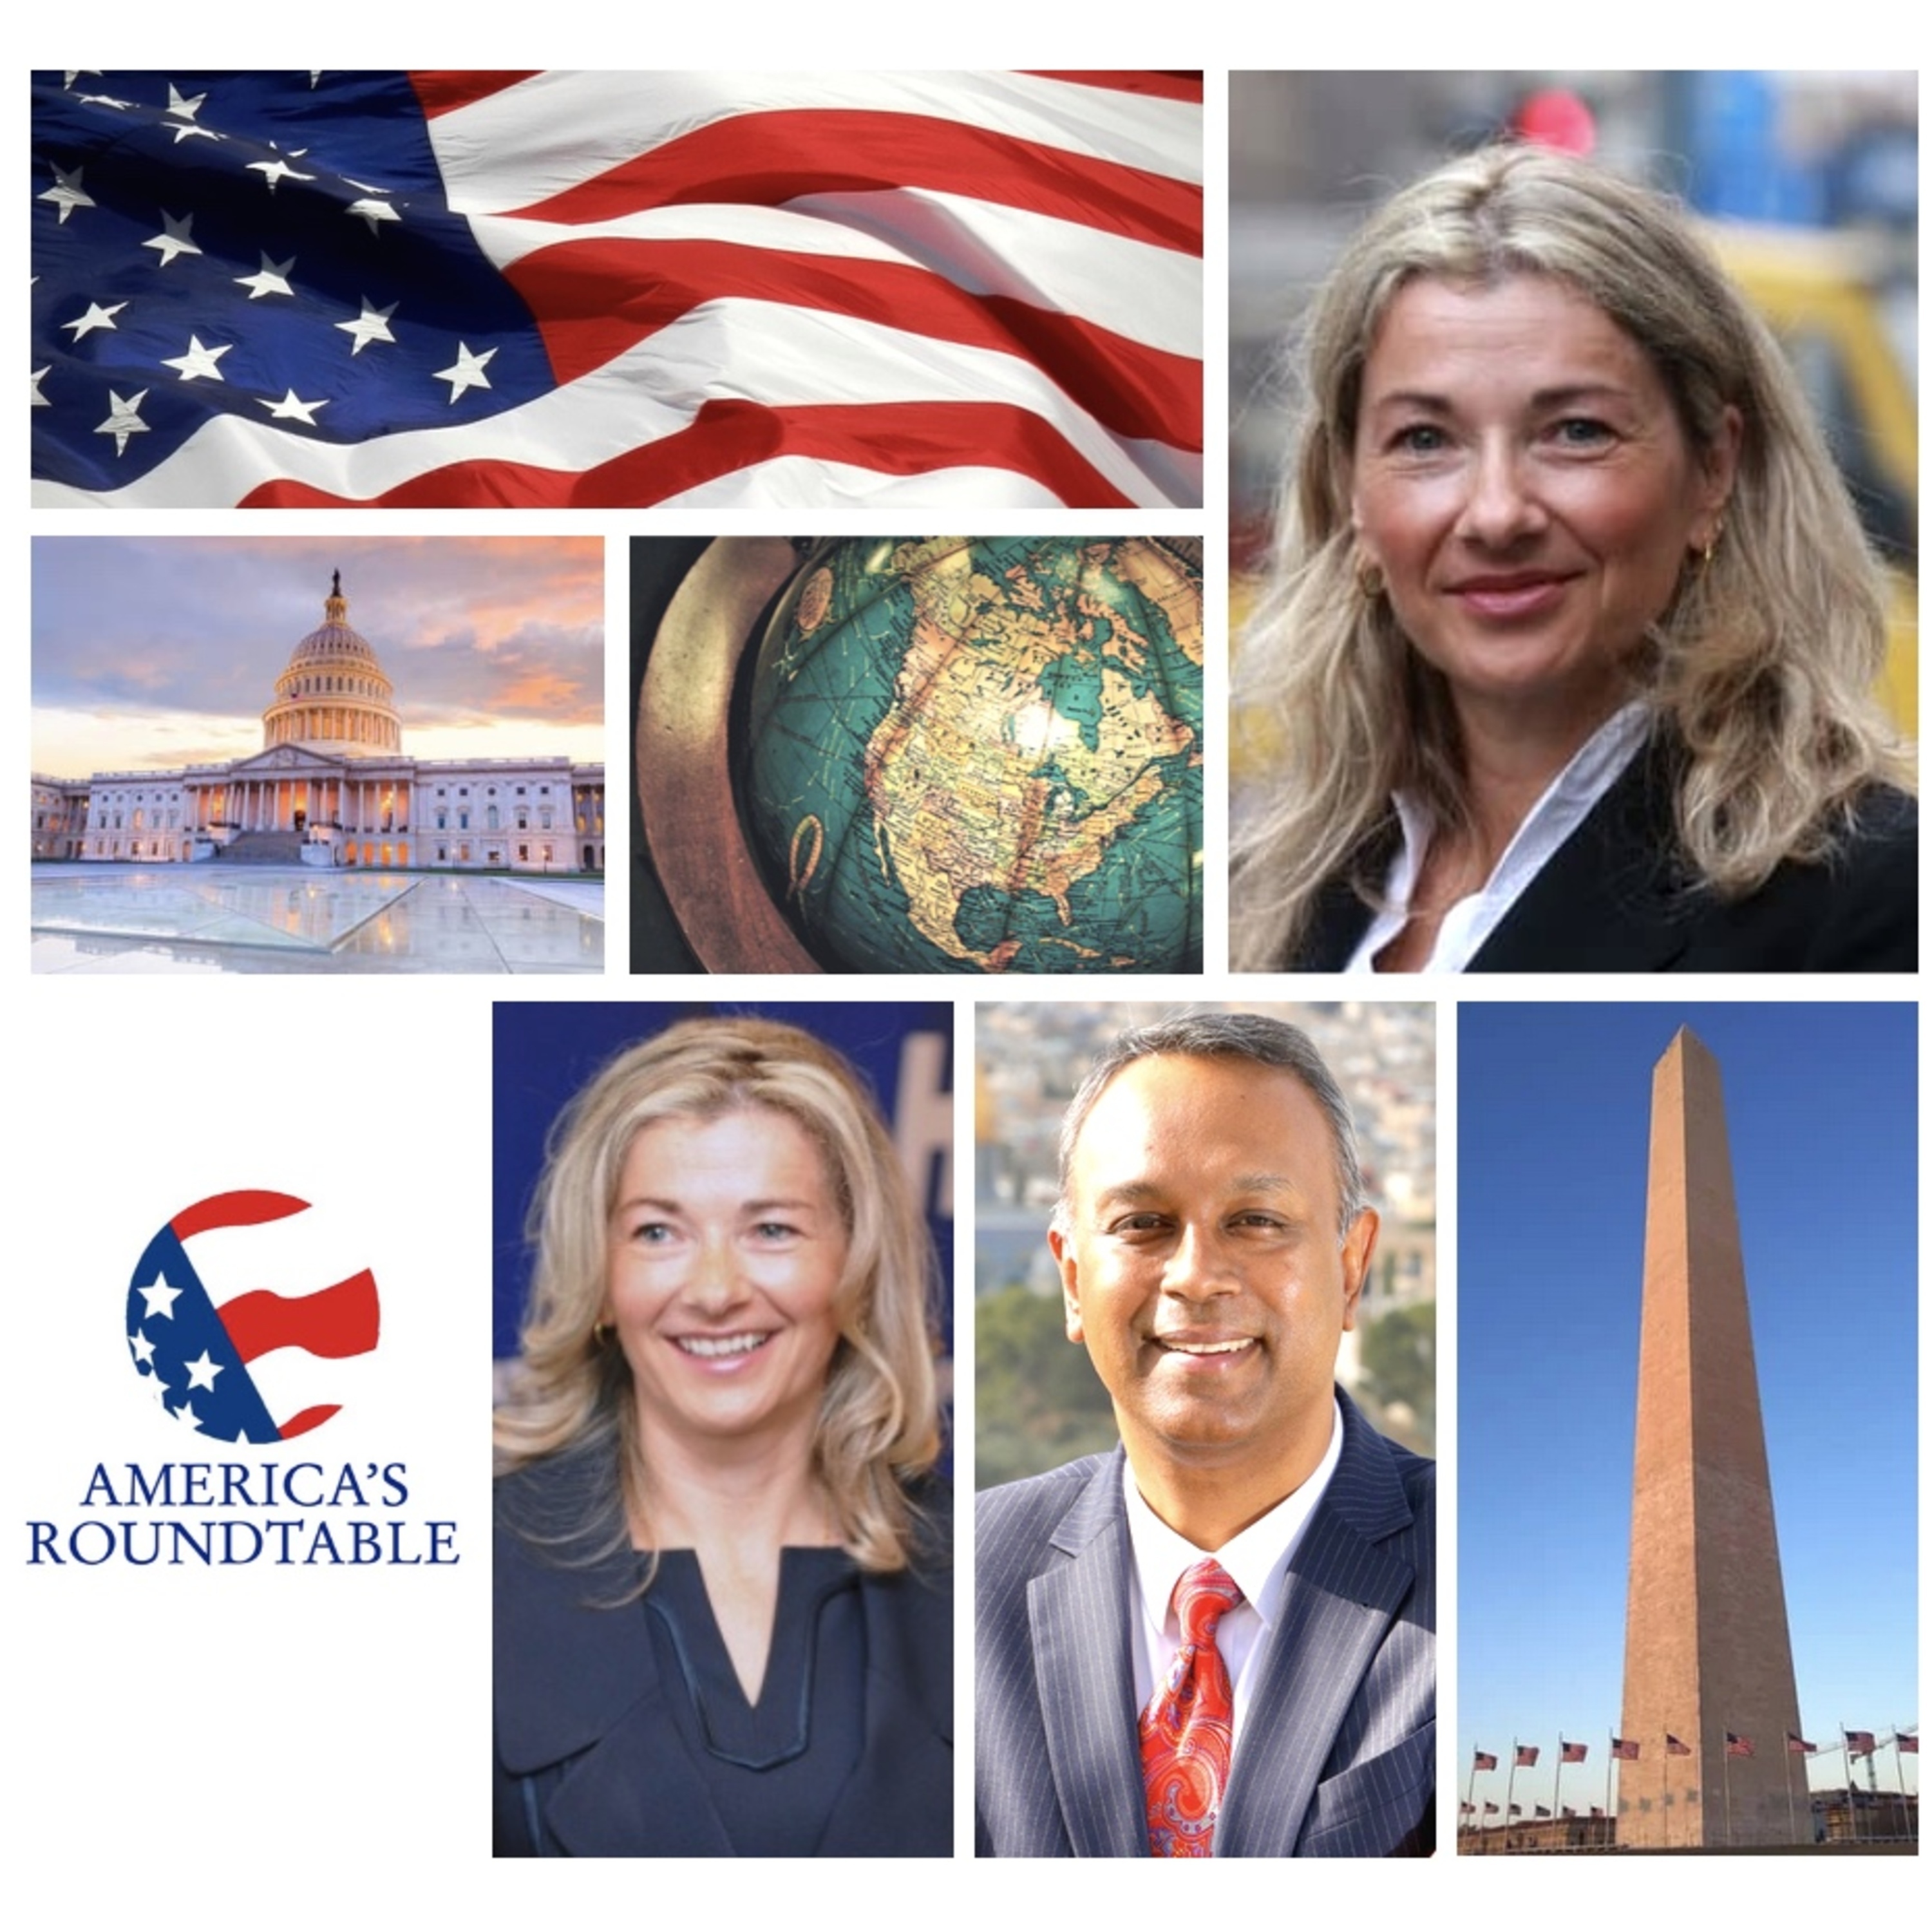 America's Roundtable — Natasha Srdoc's Commentary | The U.S. Economy, Inflation, Growing Debt and Deficit | Importance of Fiscal Responsibility